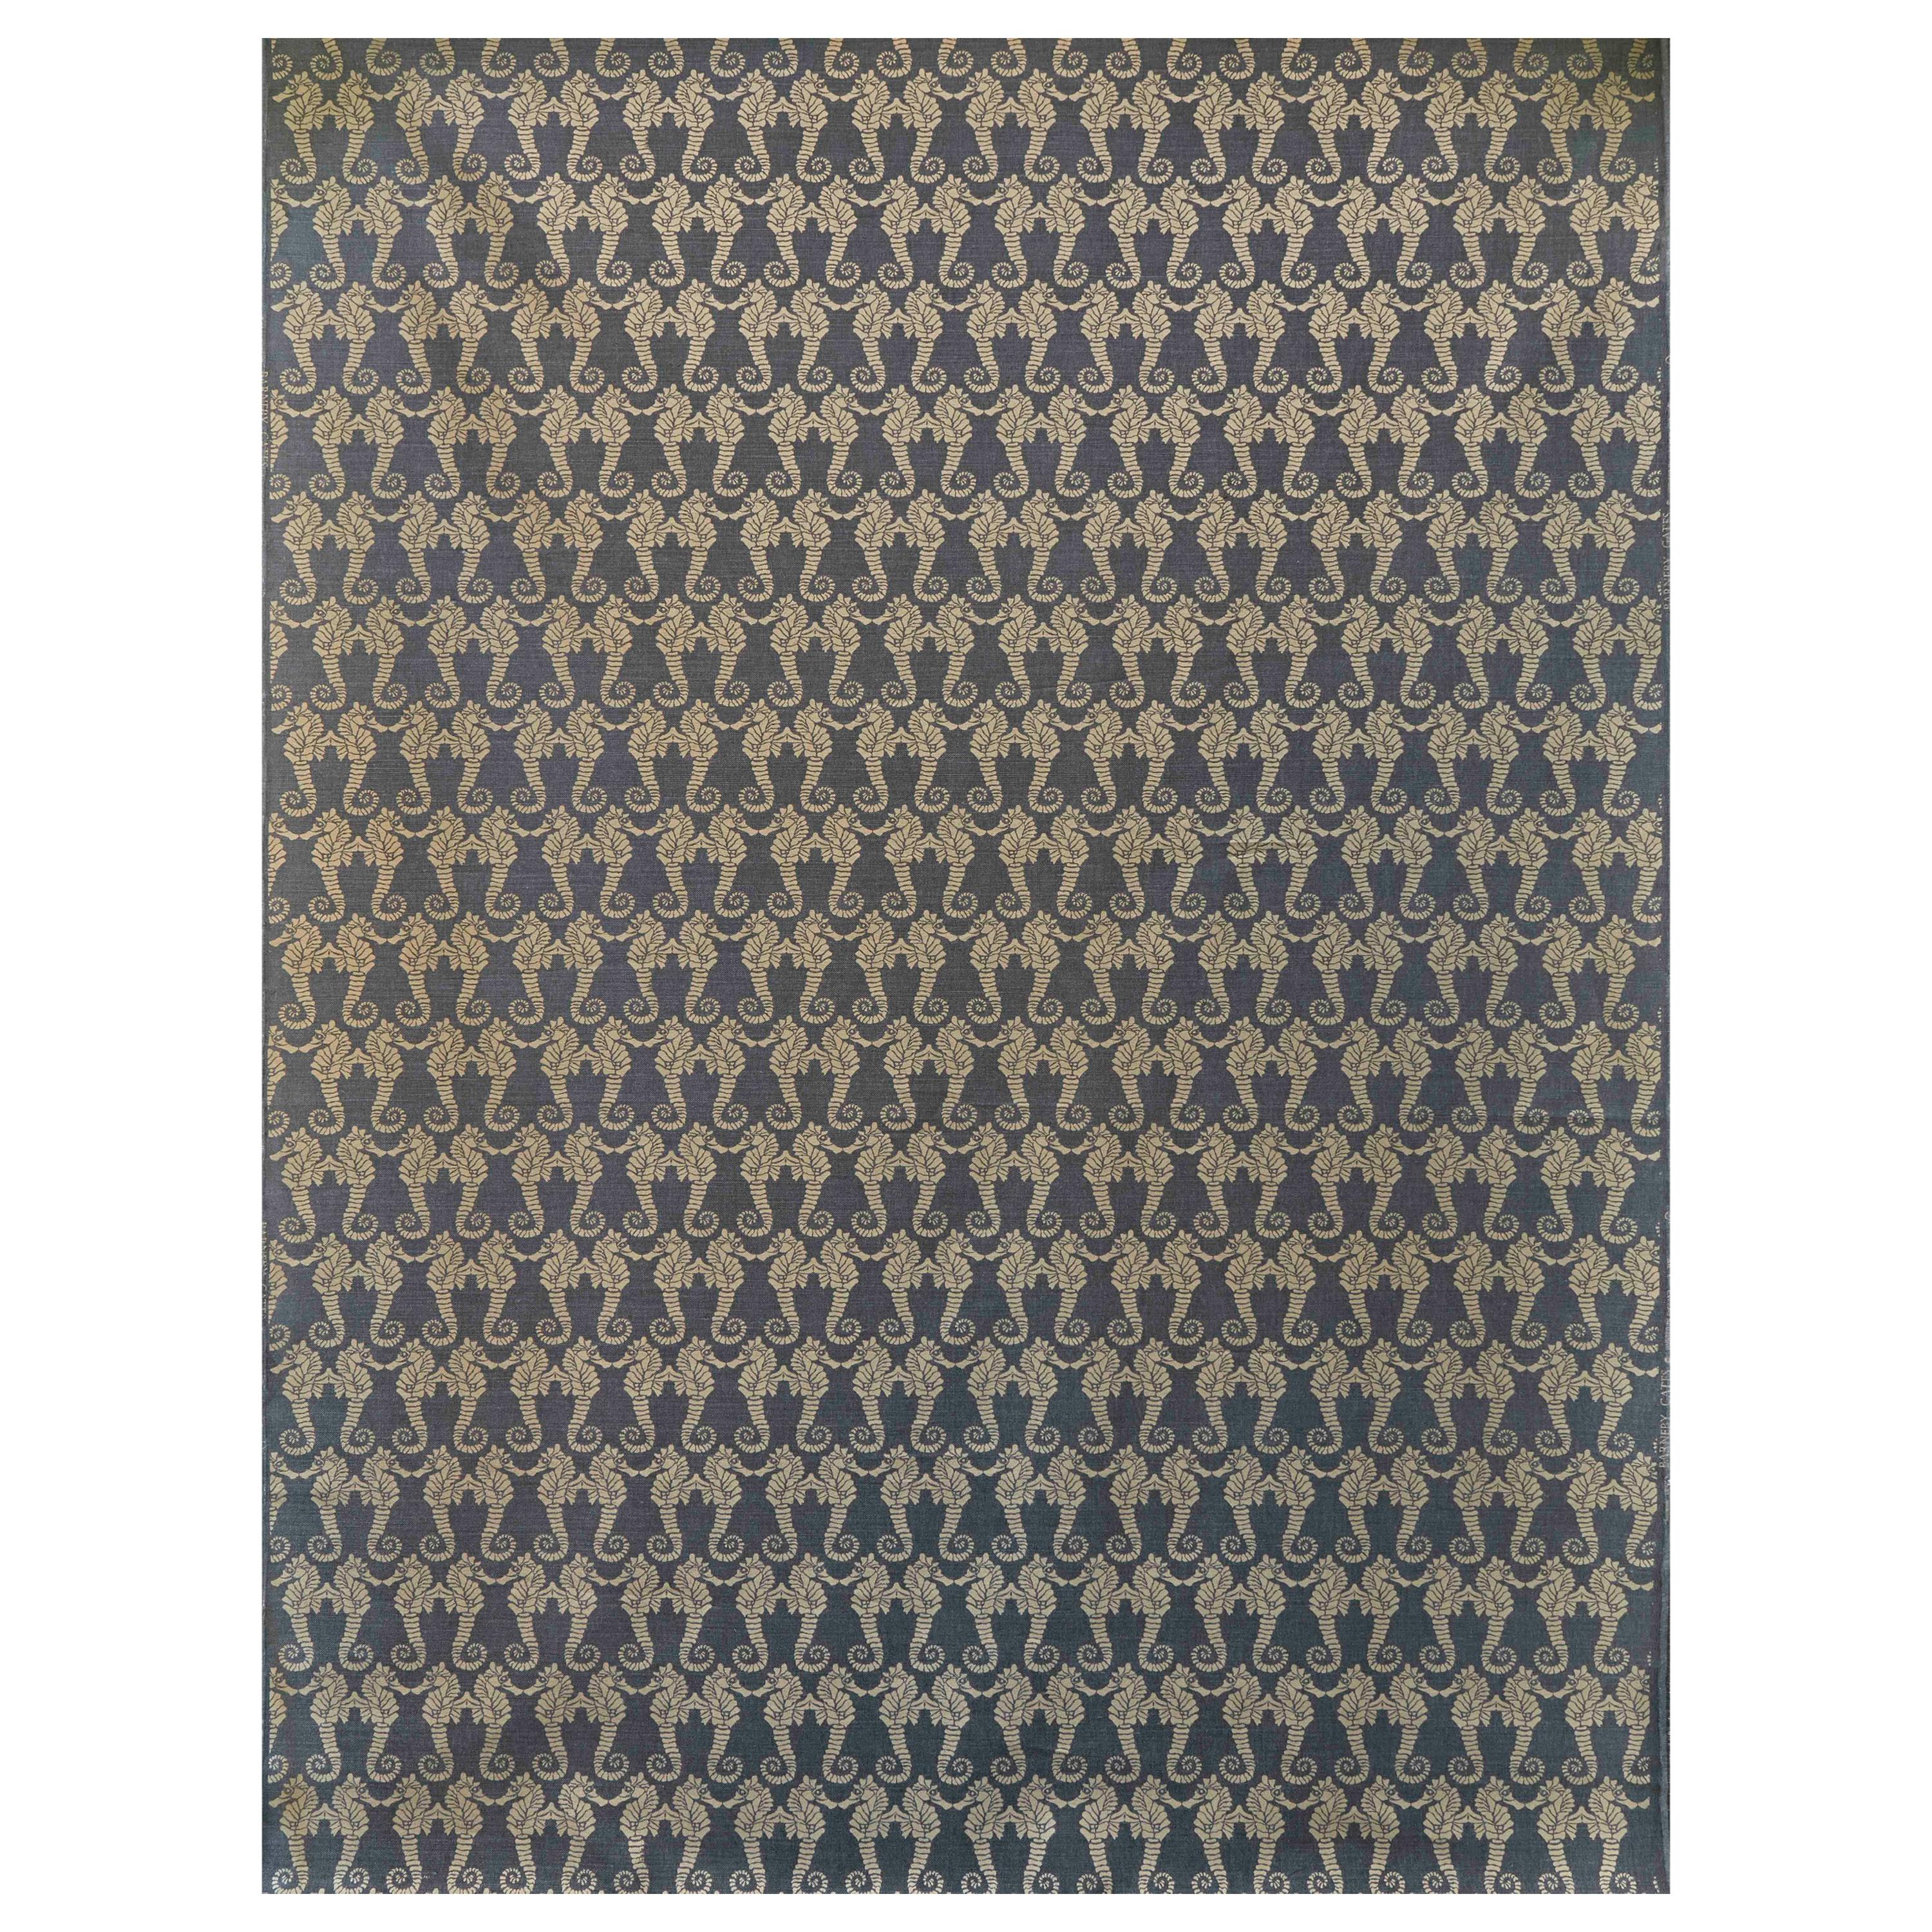 'Seahorse' Contemporary, Traditional Fabric in Gold on Charcoal For Sale